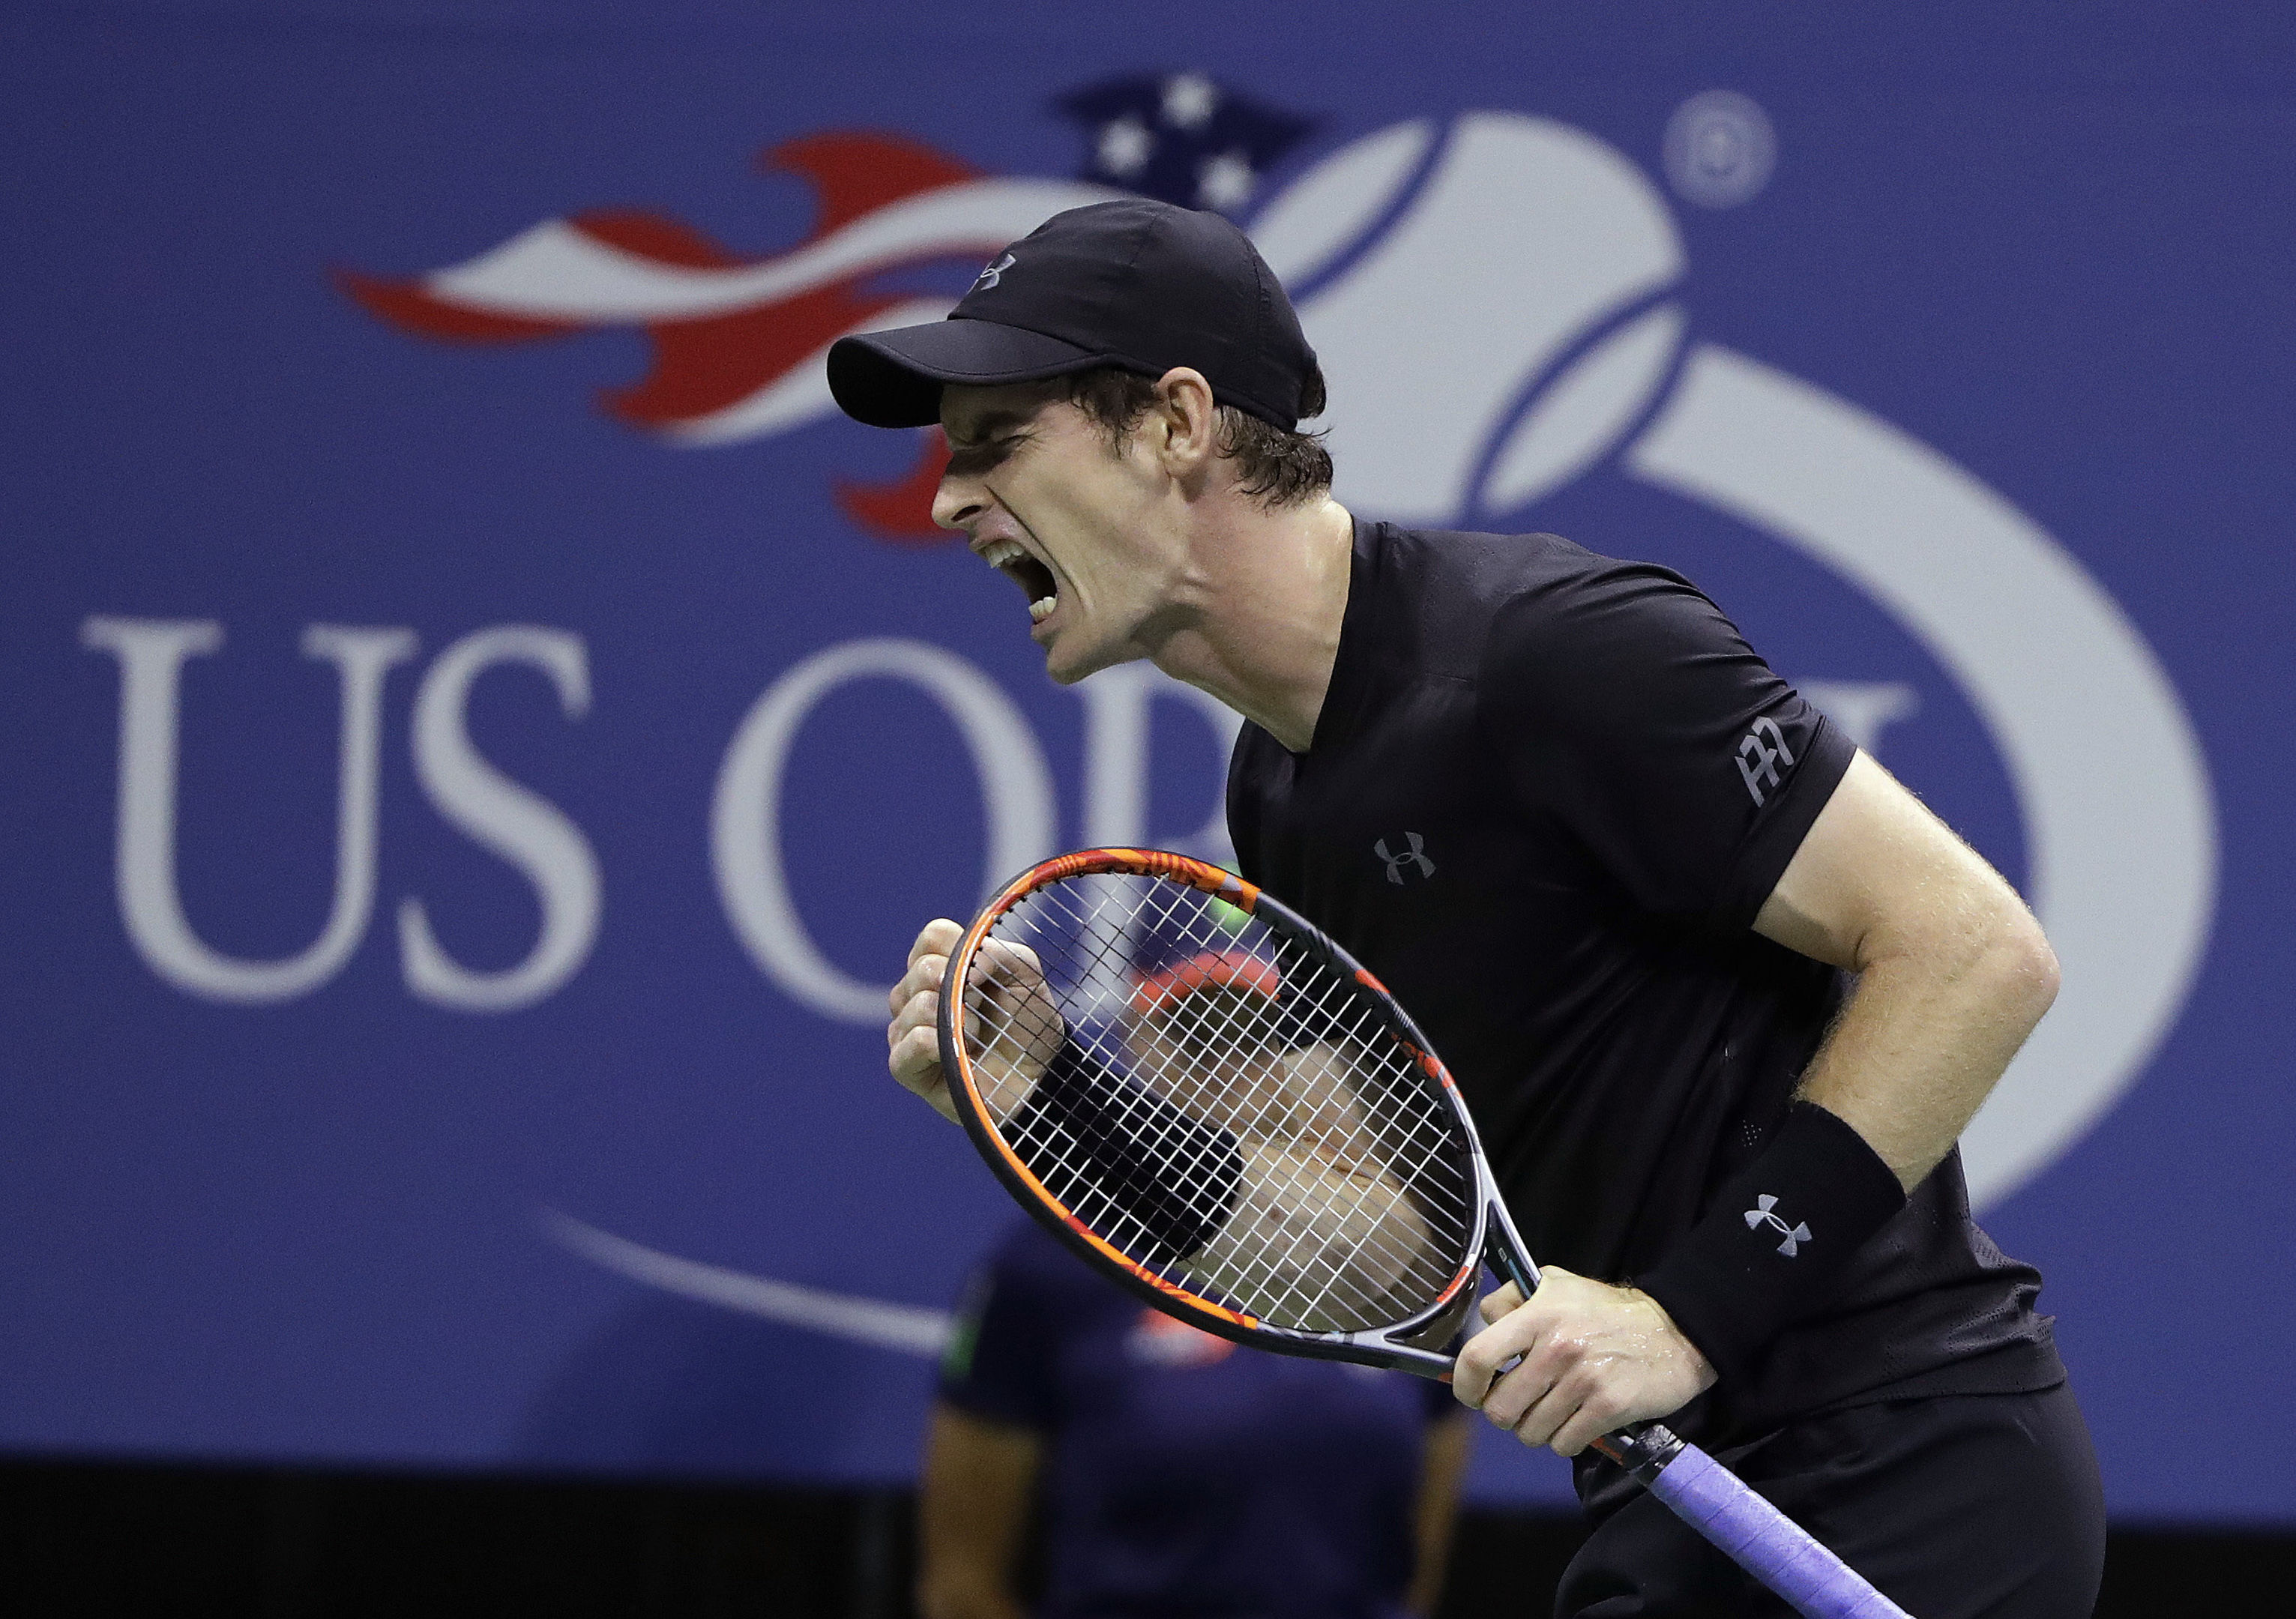 Andy Murray on his way to victory.